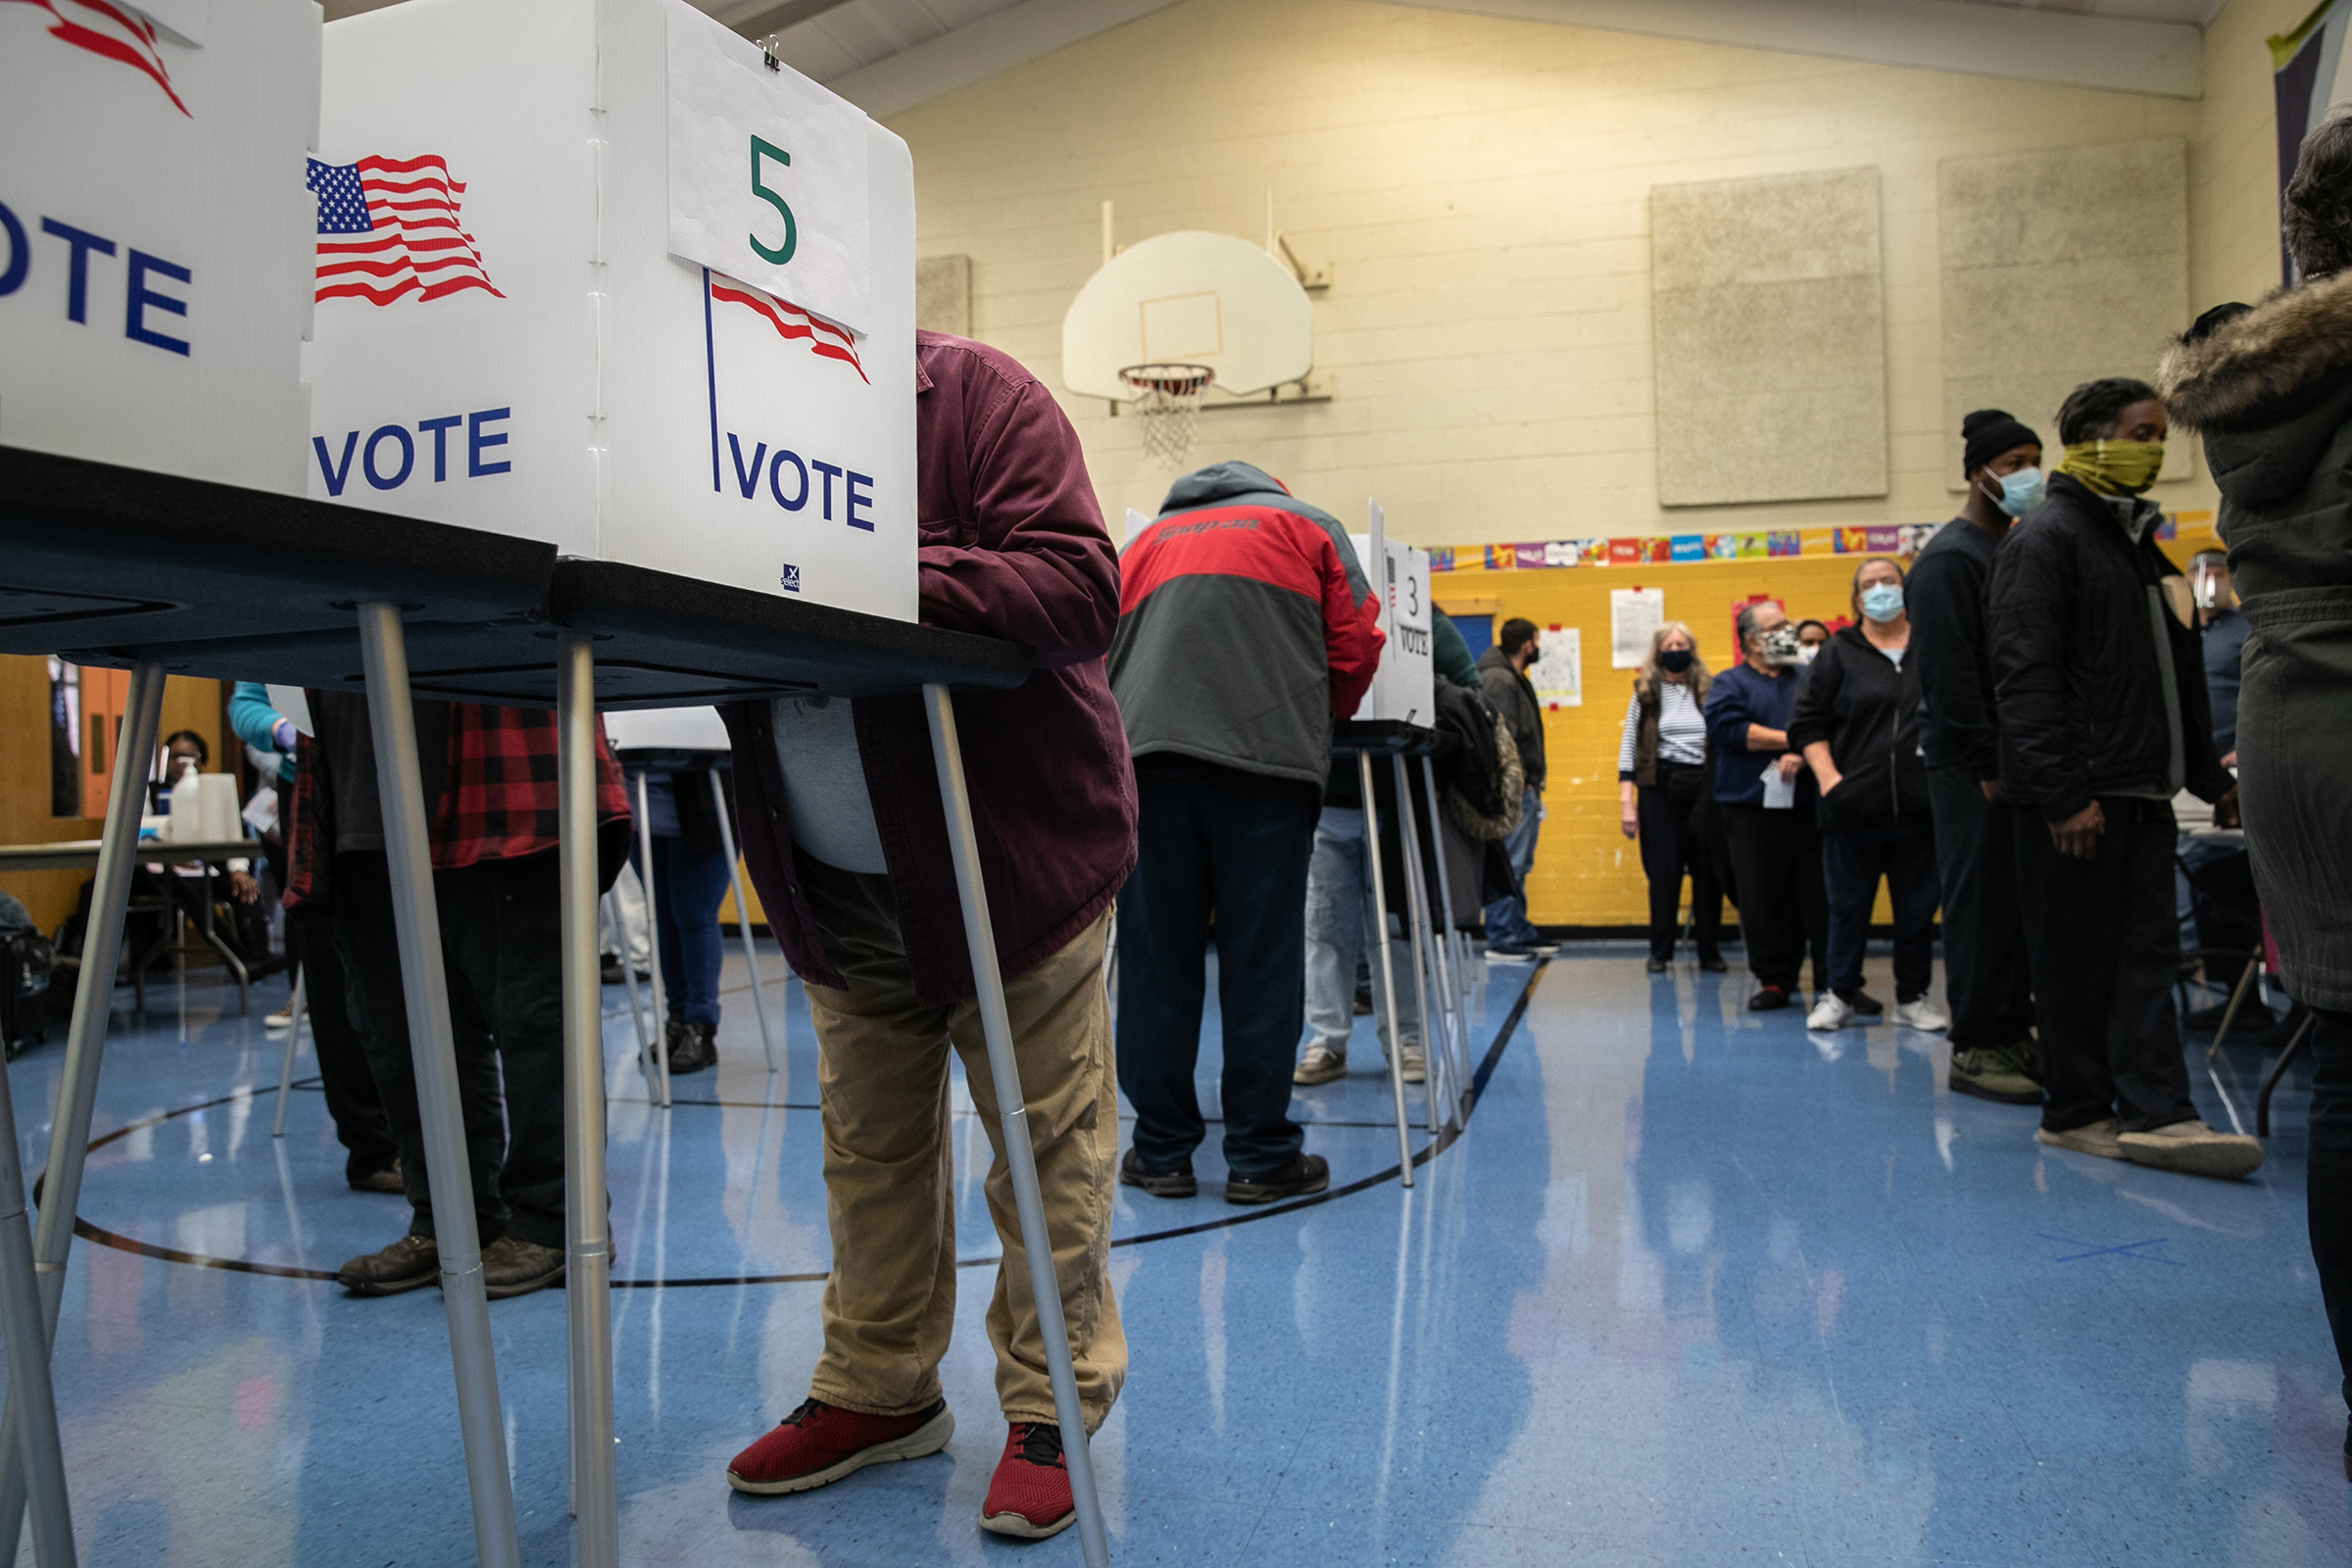 Voters fill out their ballots at a school gymnasium on November 03, 2020 in Lansing, Michigan. (John Moore / Getty Images)